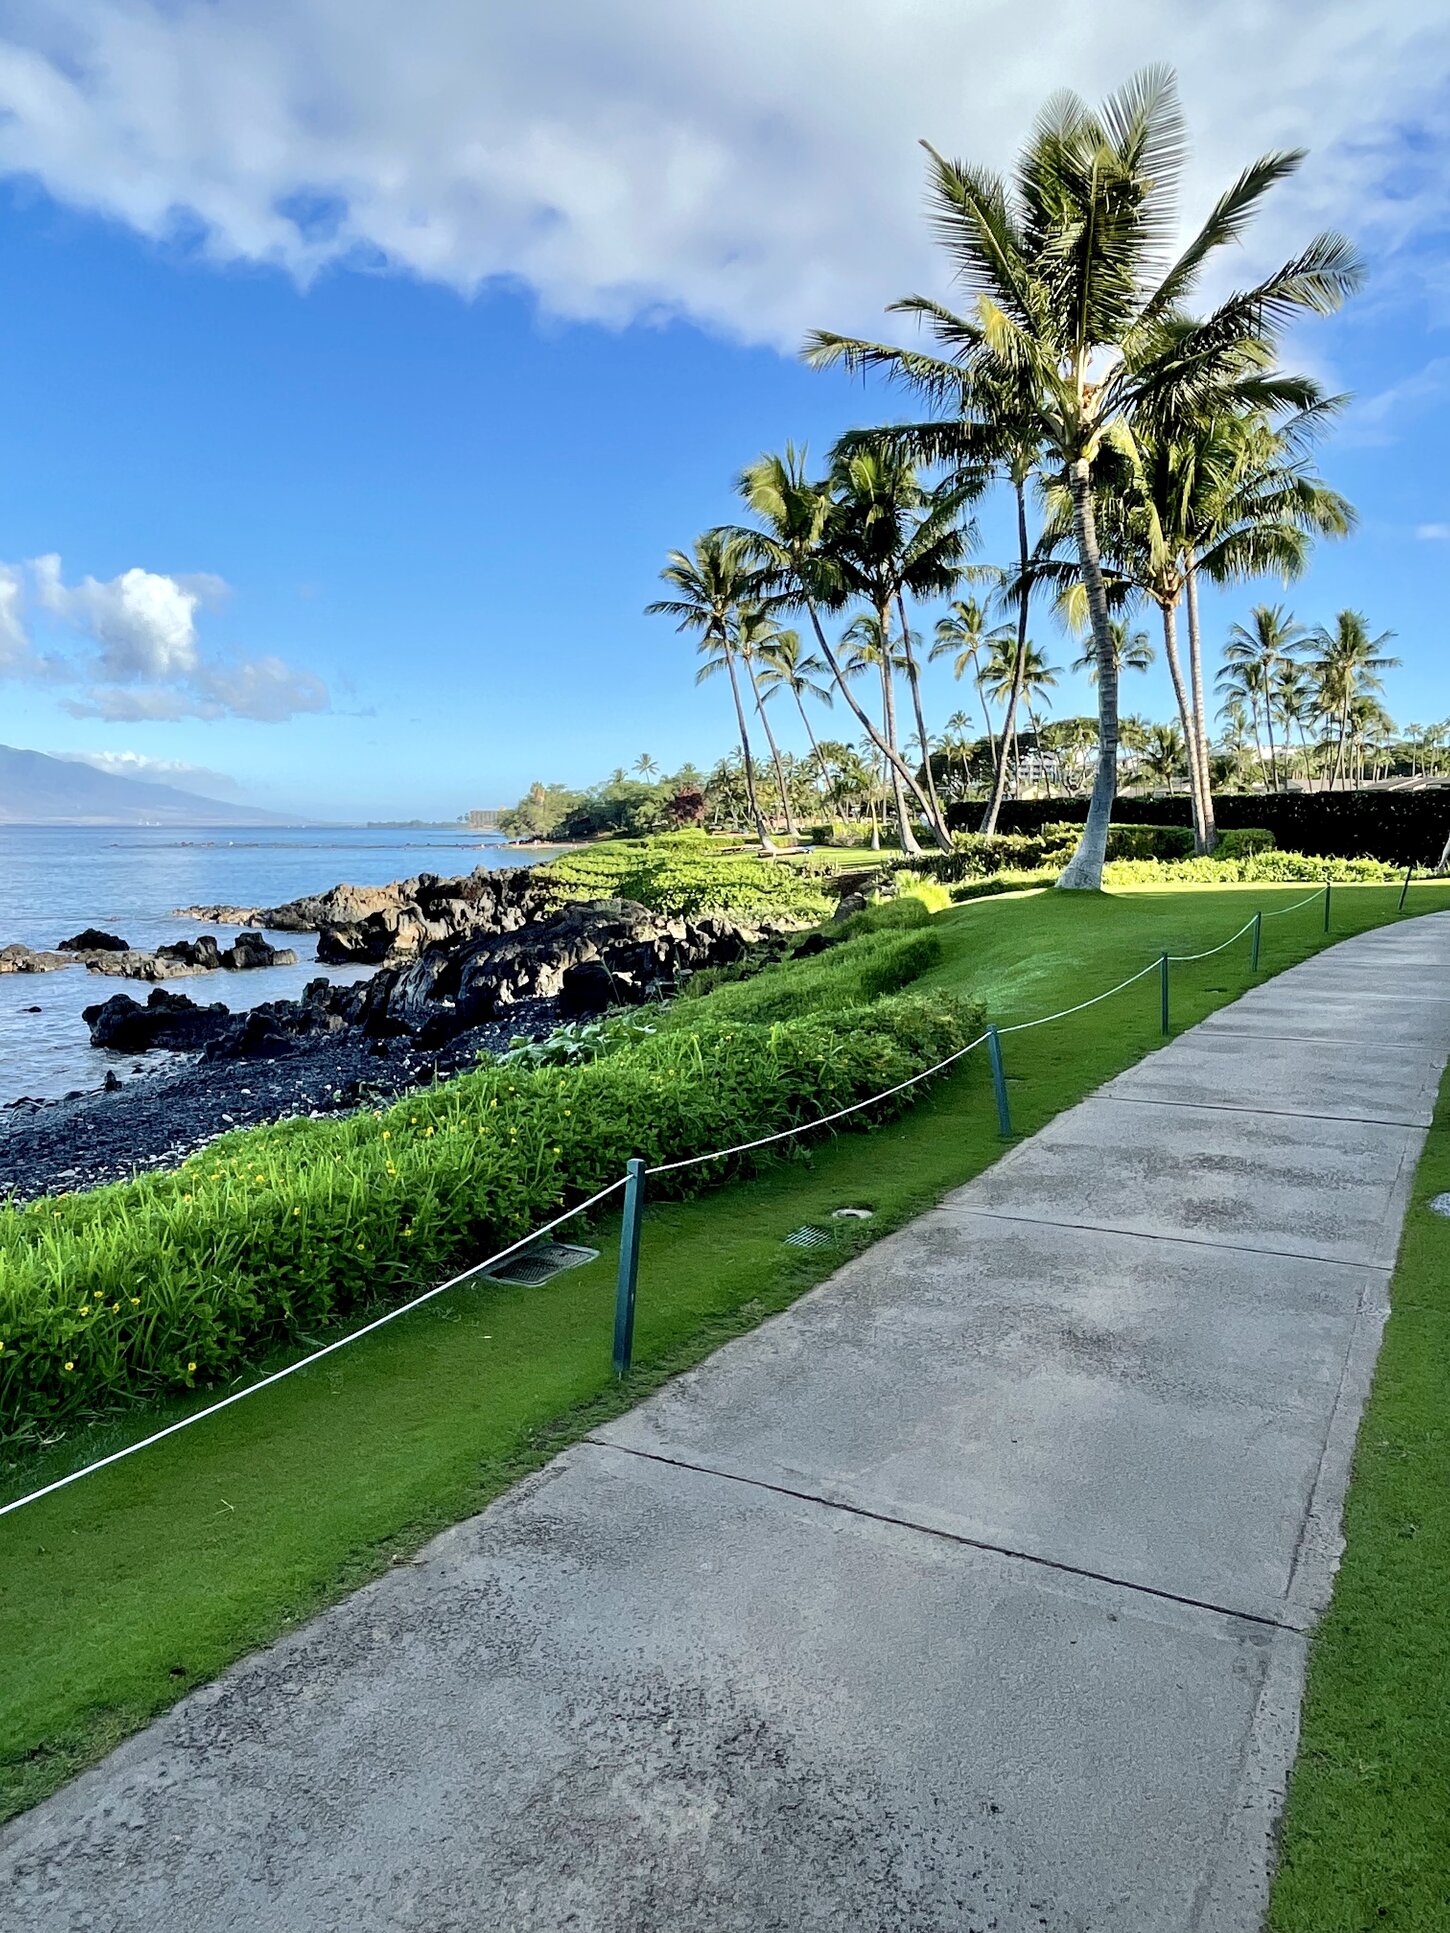 Wailea Beach Path -  1.6 mile long one way. Stunning views for your morning walk and a coffee stop at the Whale’s Tale on the way!